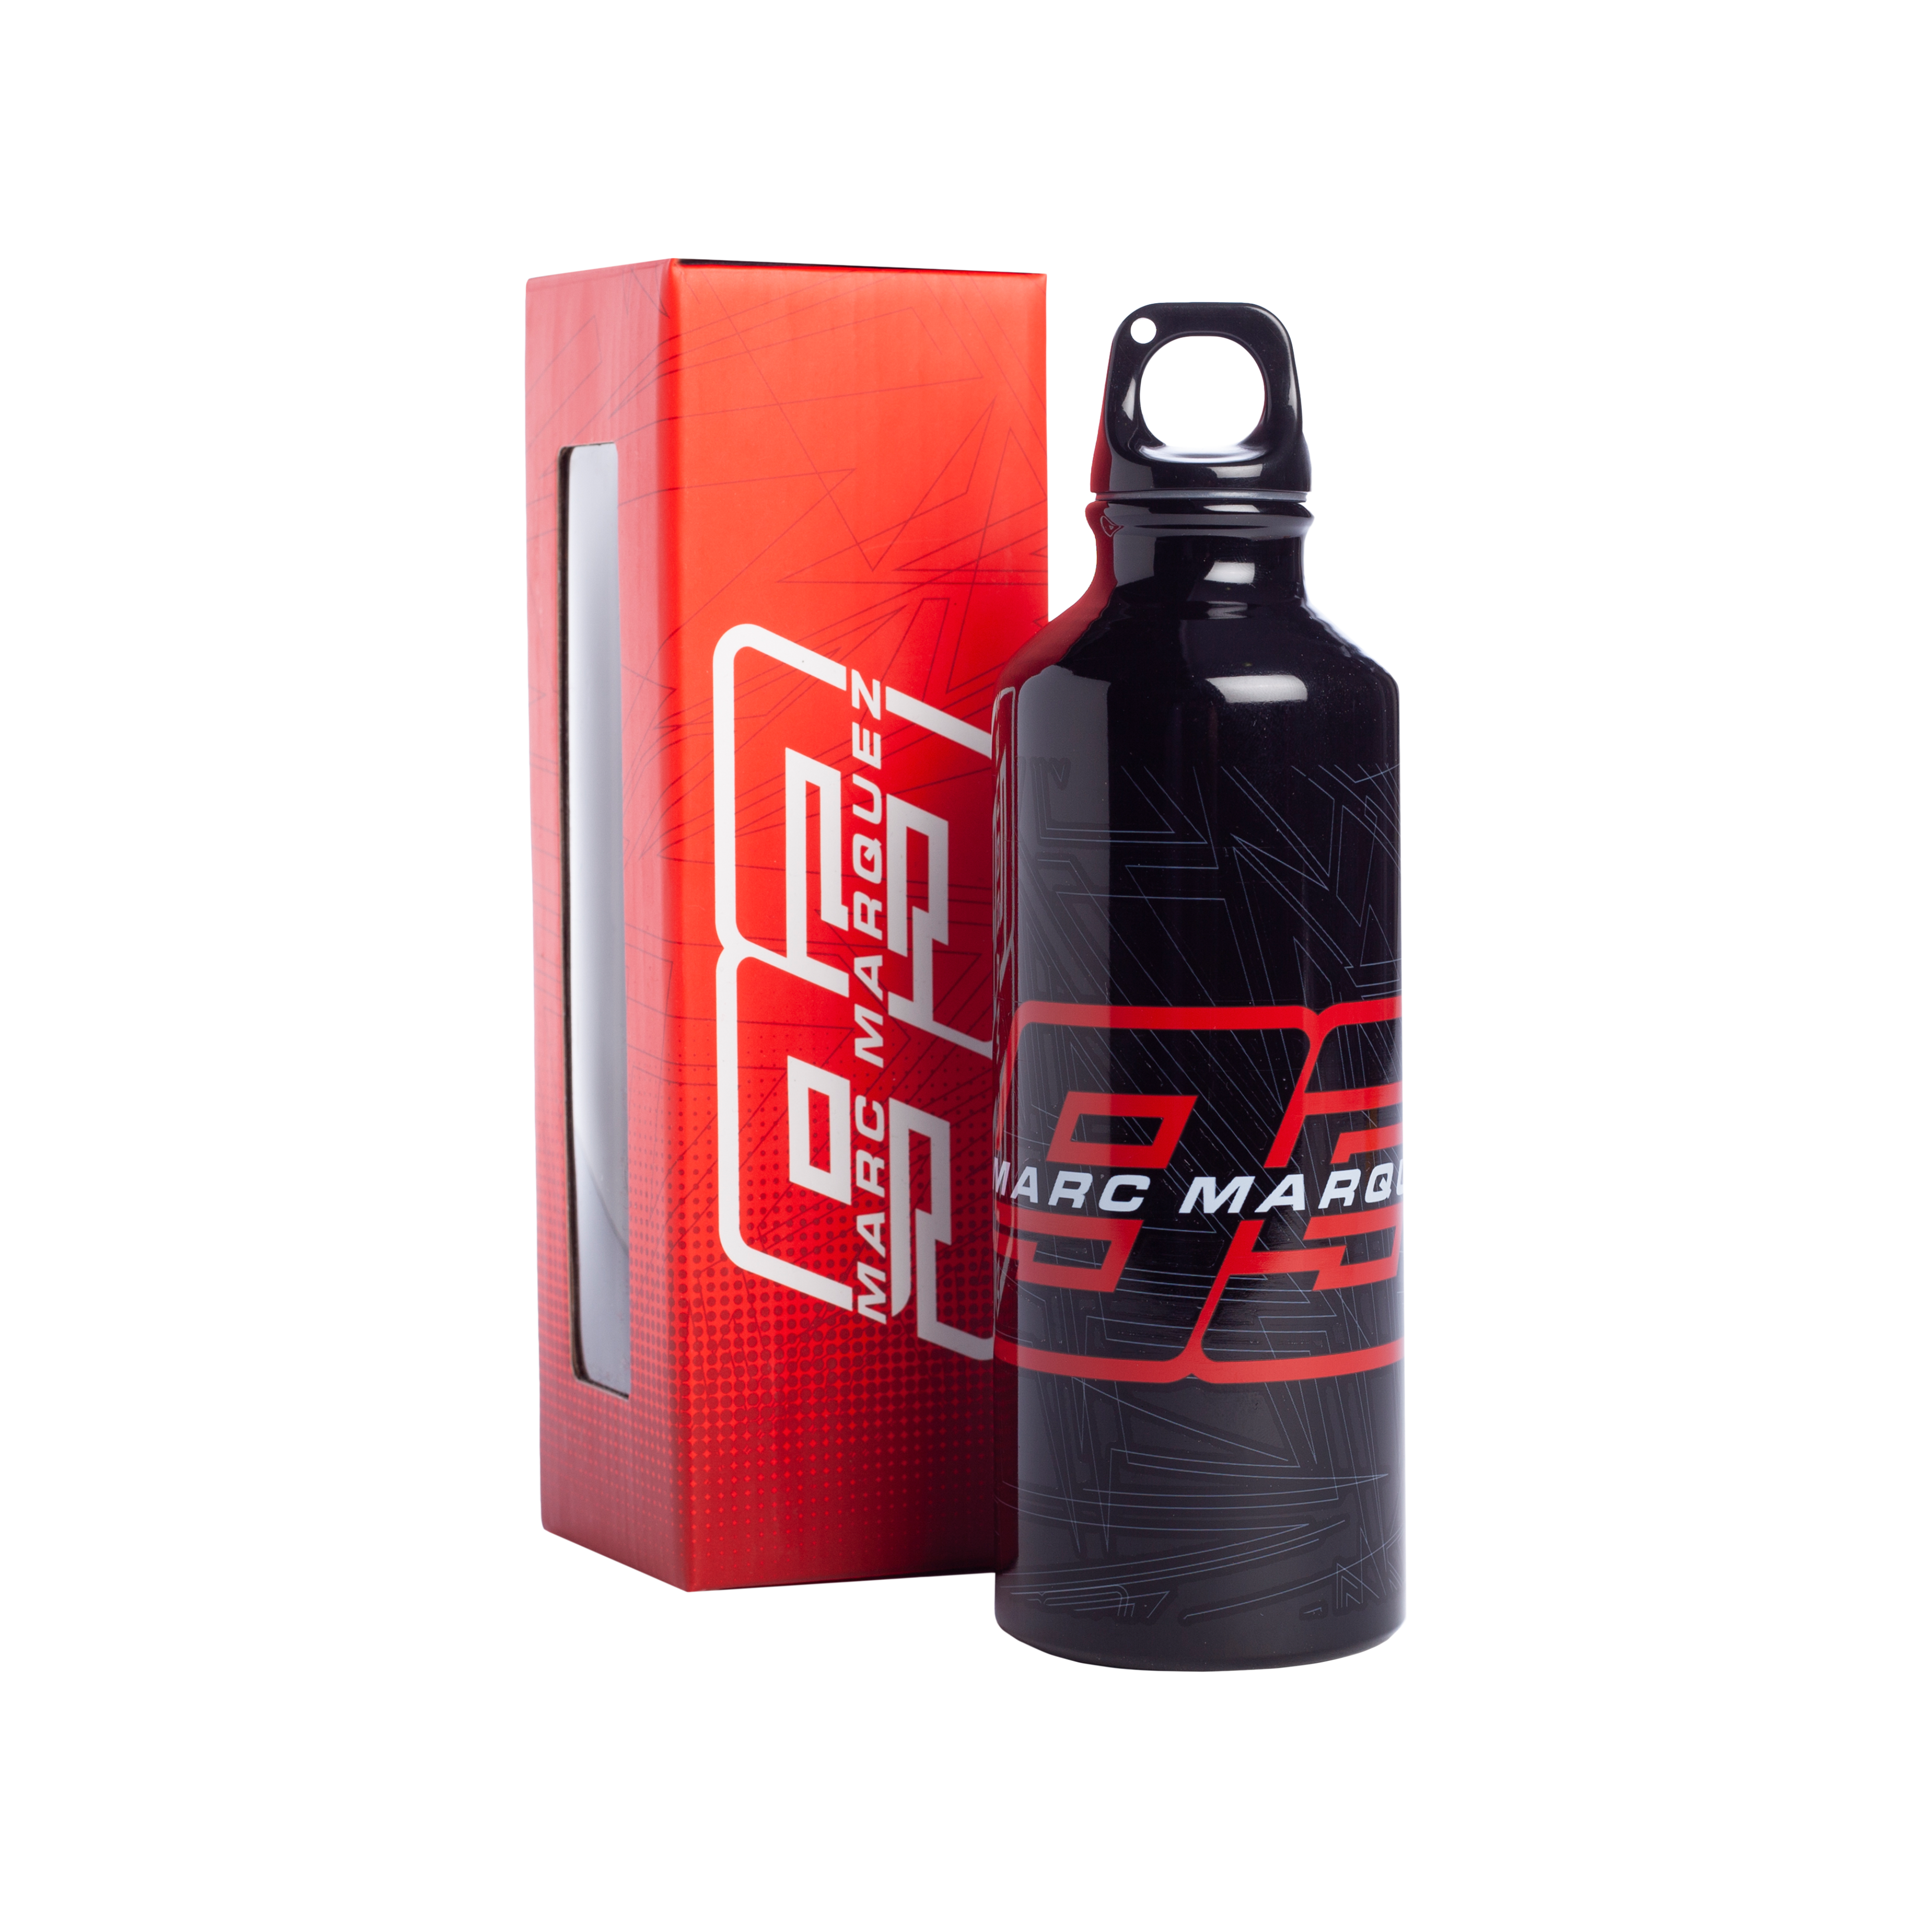 New Official Marc Marquez 93 Baby Bottle MMUBR 160603 or 16 53015 